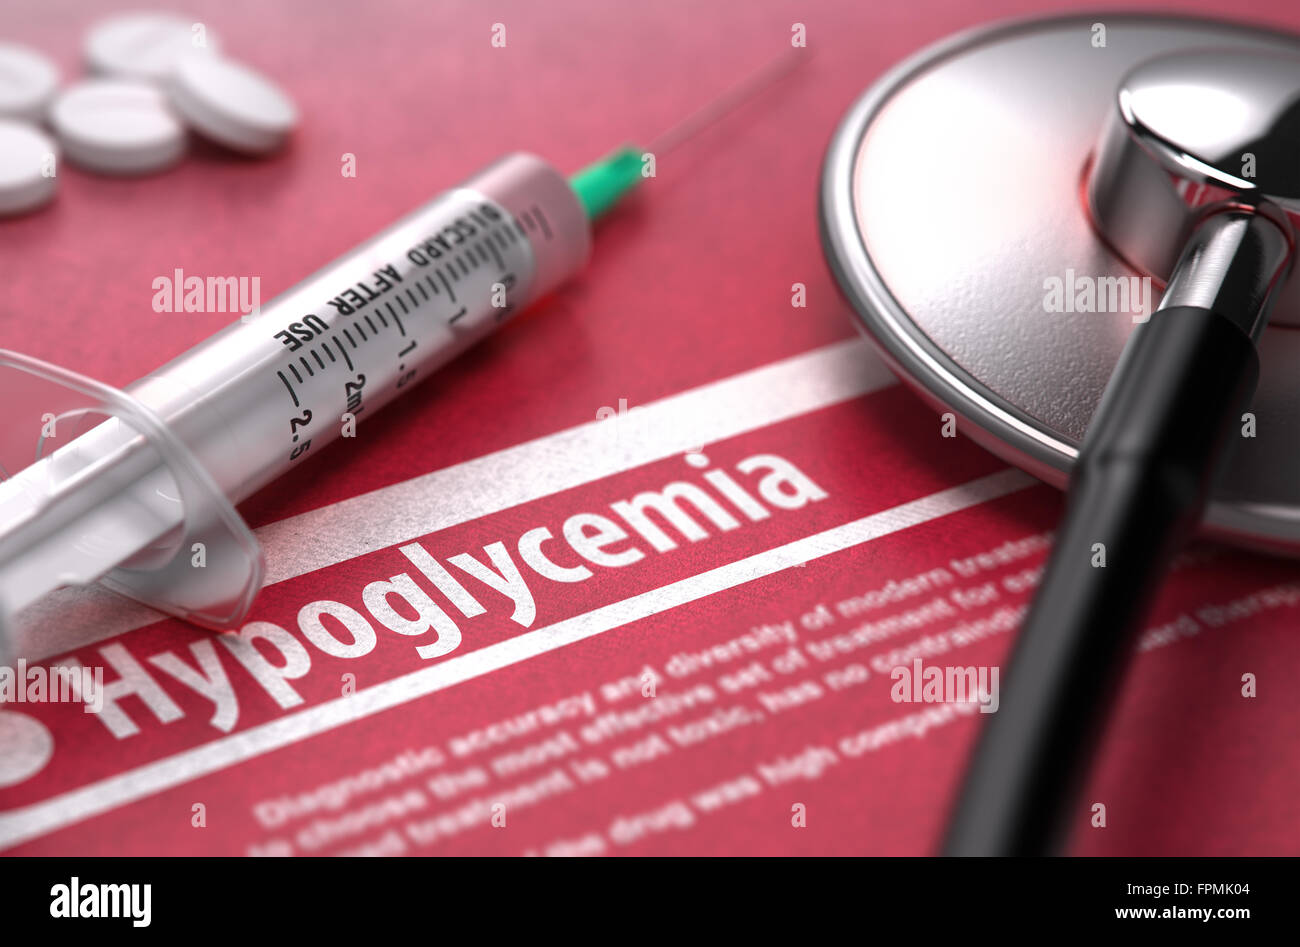 Hypoglycemia. Medical Concept on Red Background. Stock Photo